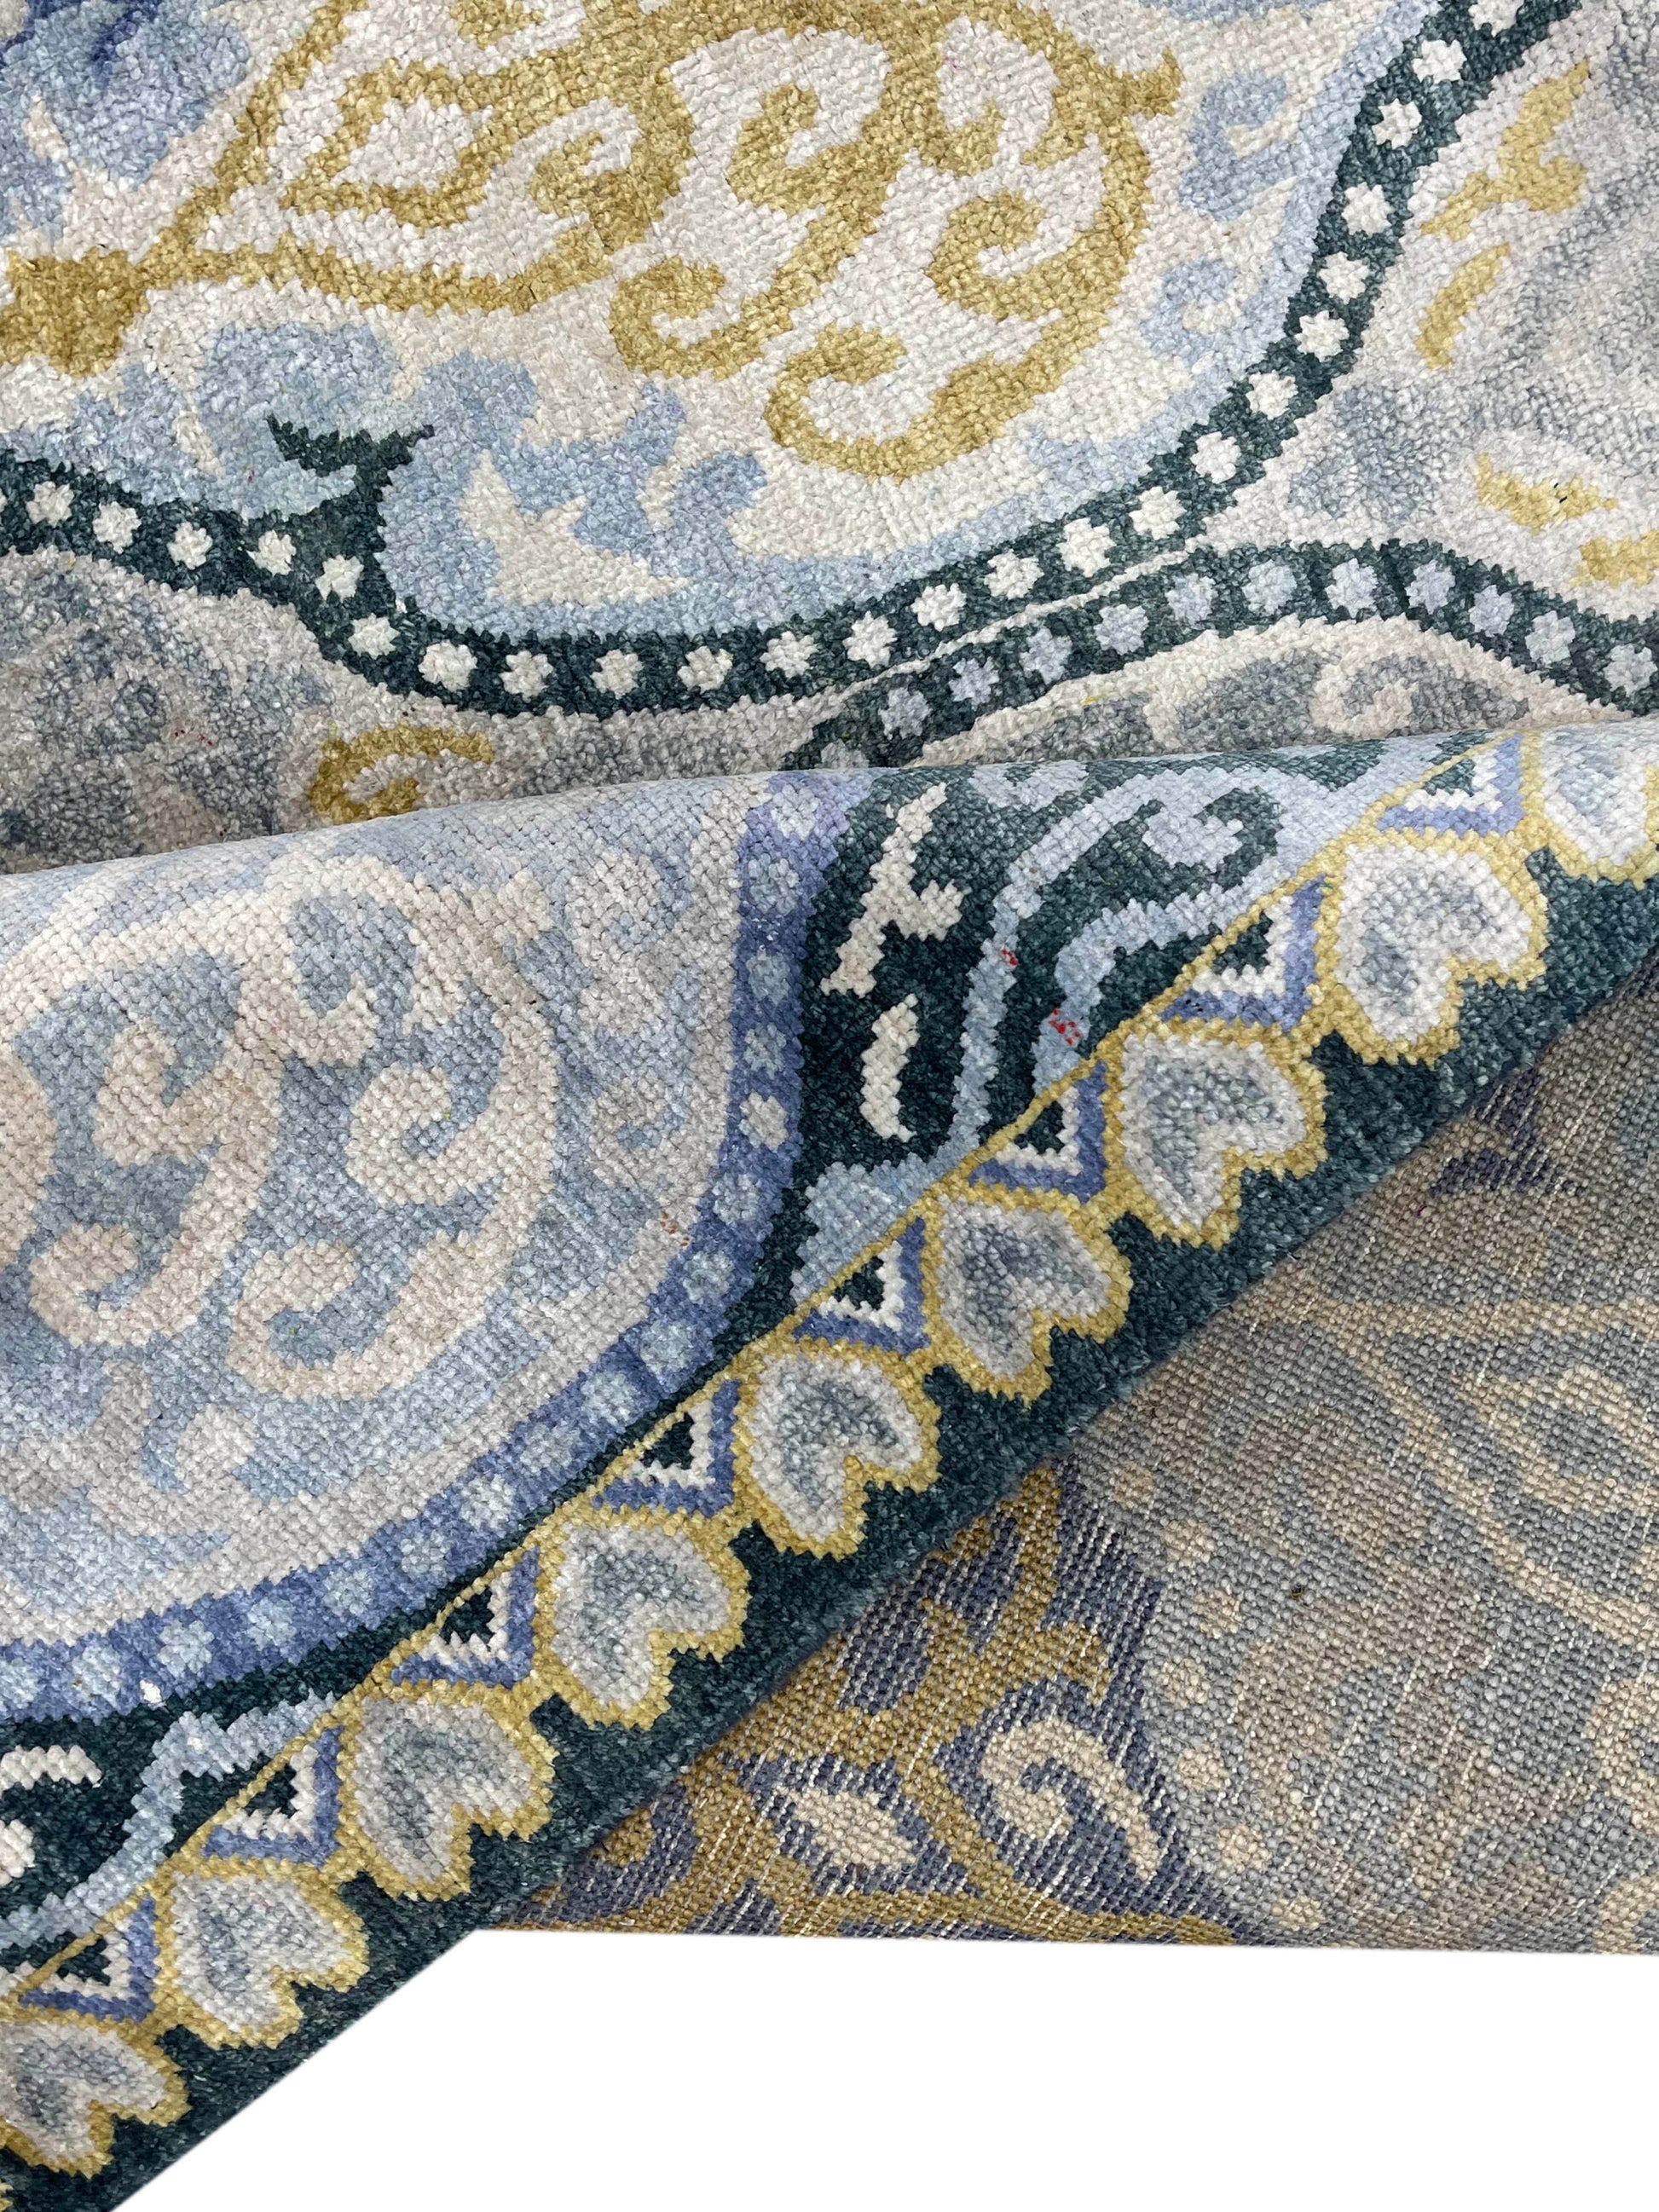 Get trendy with Blue and Grey Pure Silk Transitional Area Handknotted Rug 7.11x10.3ft 240x313Cms - Contemporary Rugs available at Jaipur Oriental Rugs. Grab yours for $5845.00 today!